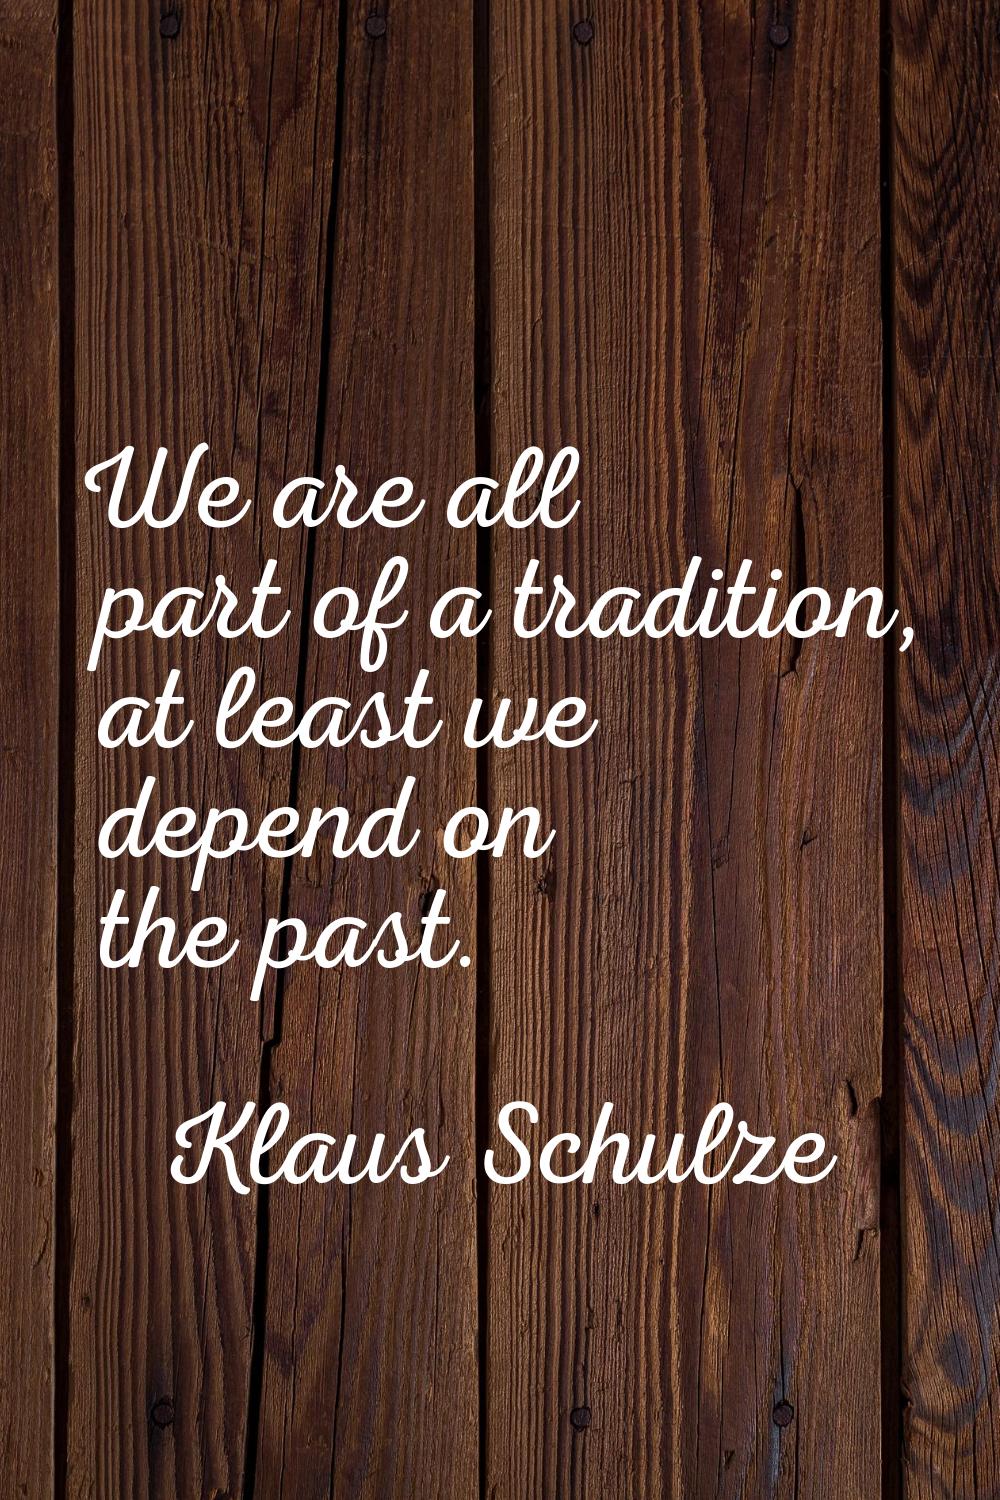 We are all part of a tradition, at least we depend on the past.